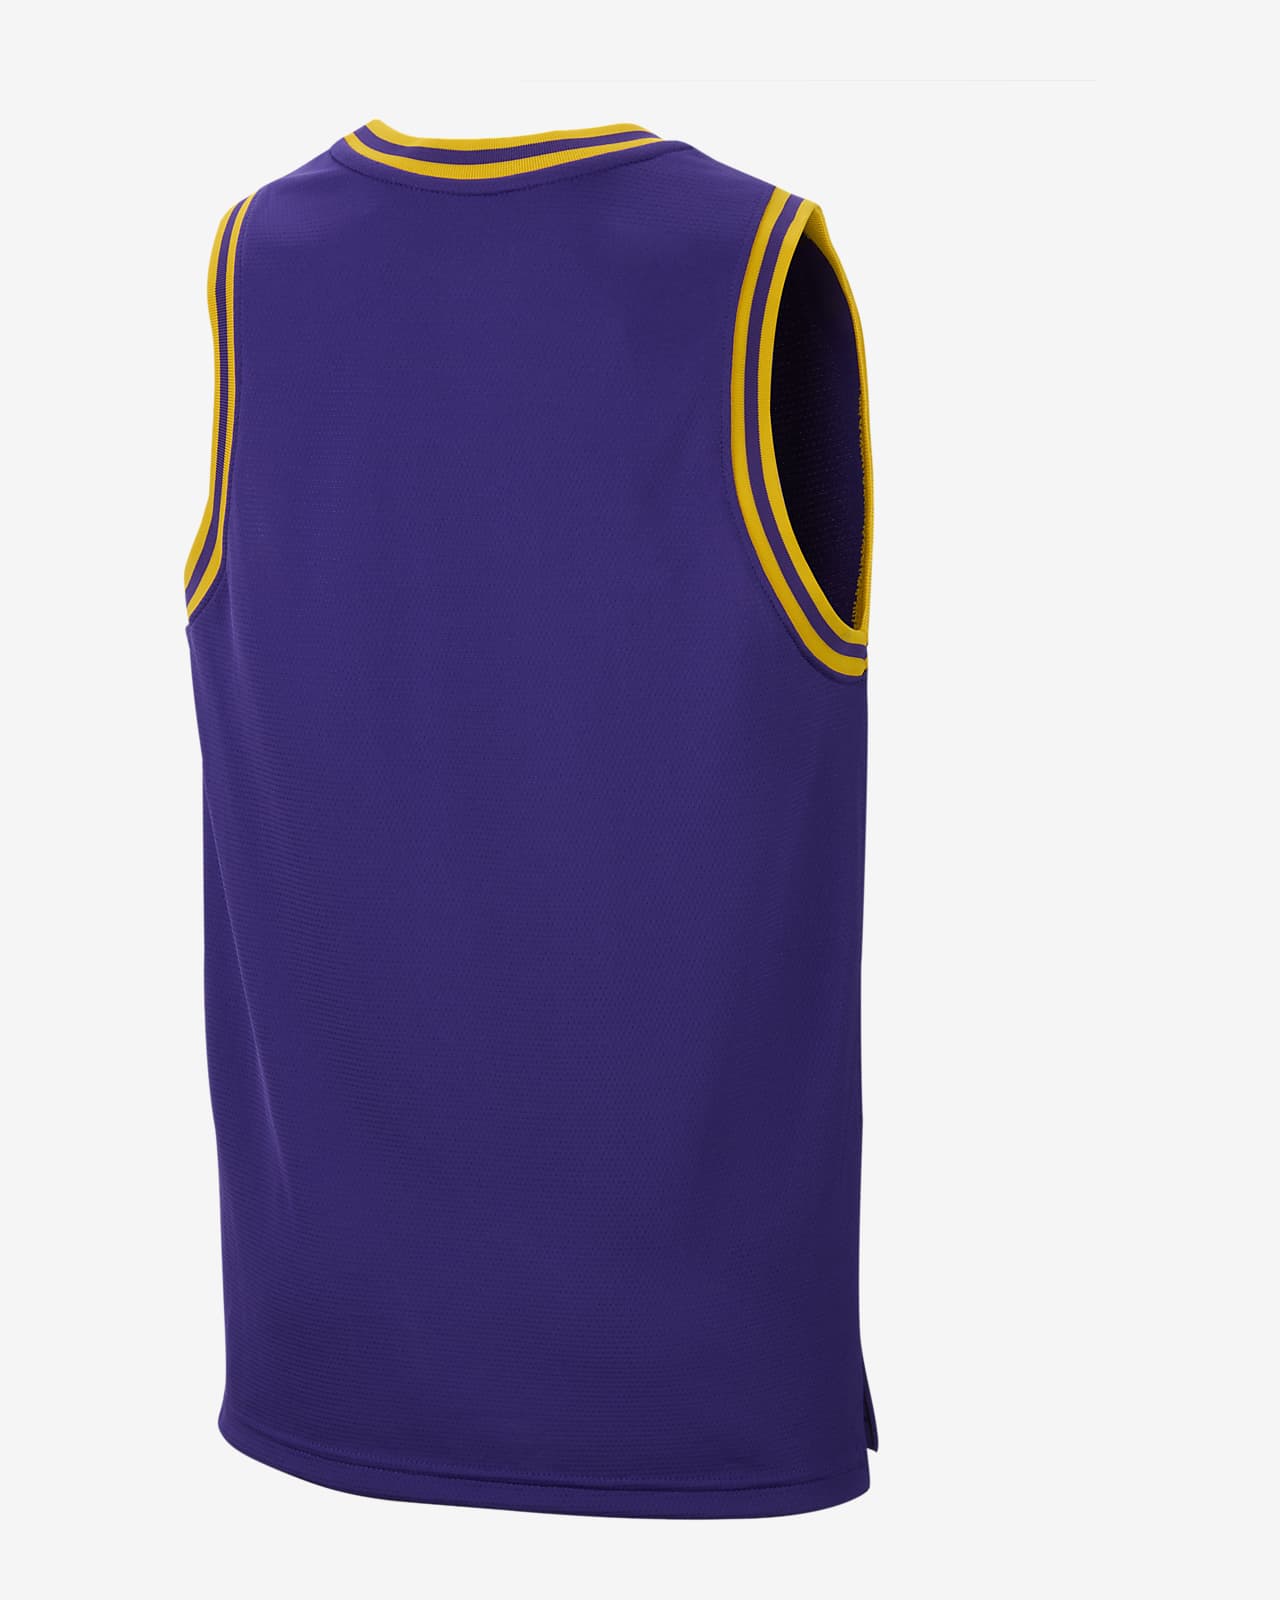 Los Angeles Lakers Courtside Older Kids' (Boys') Nike Dri-FIT DNA